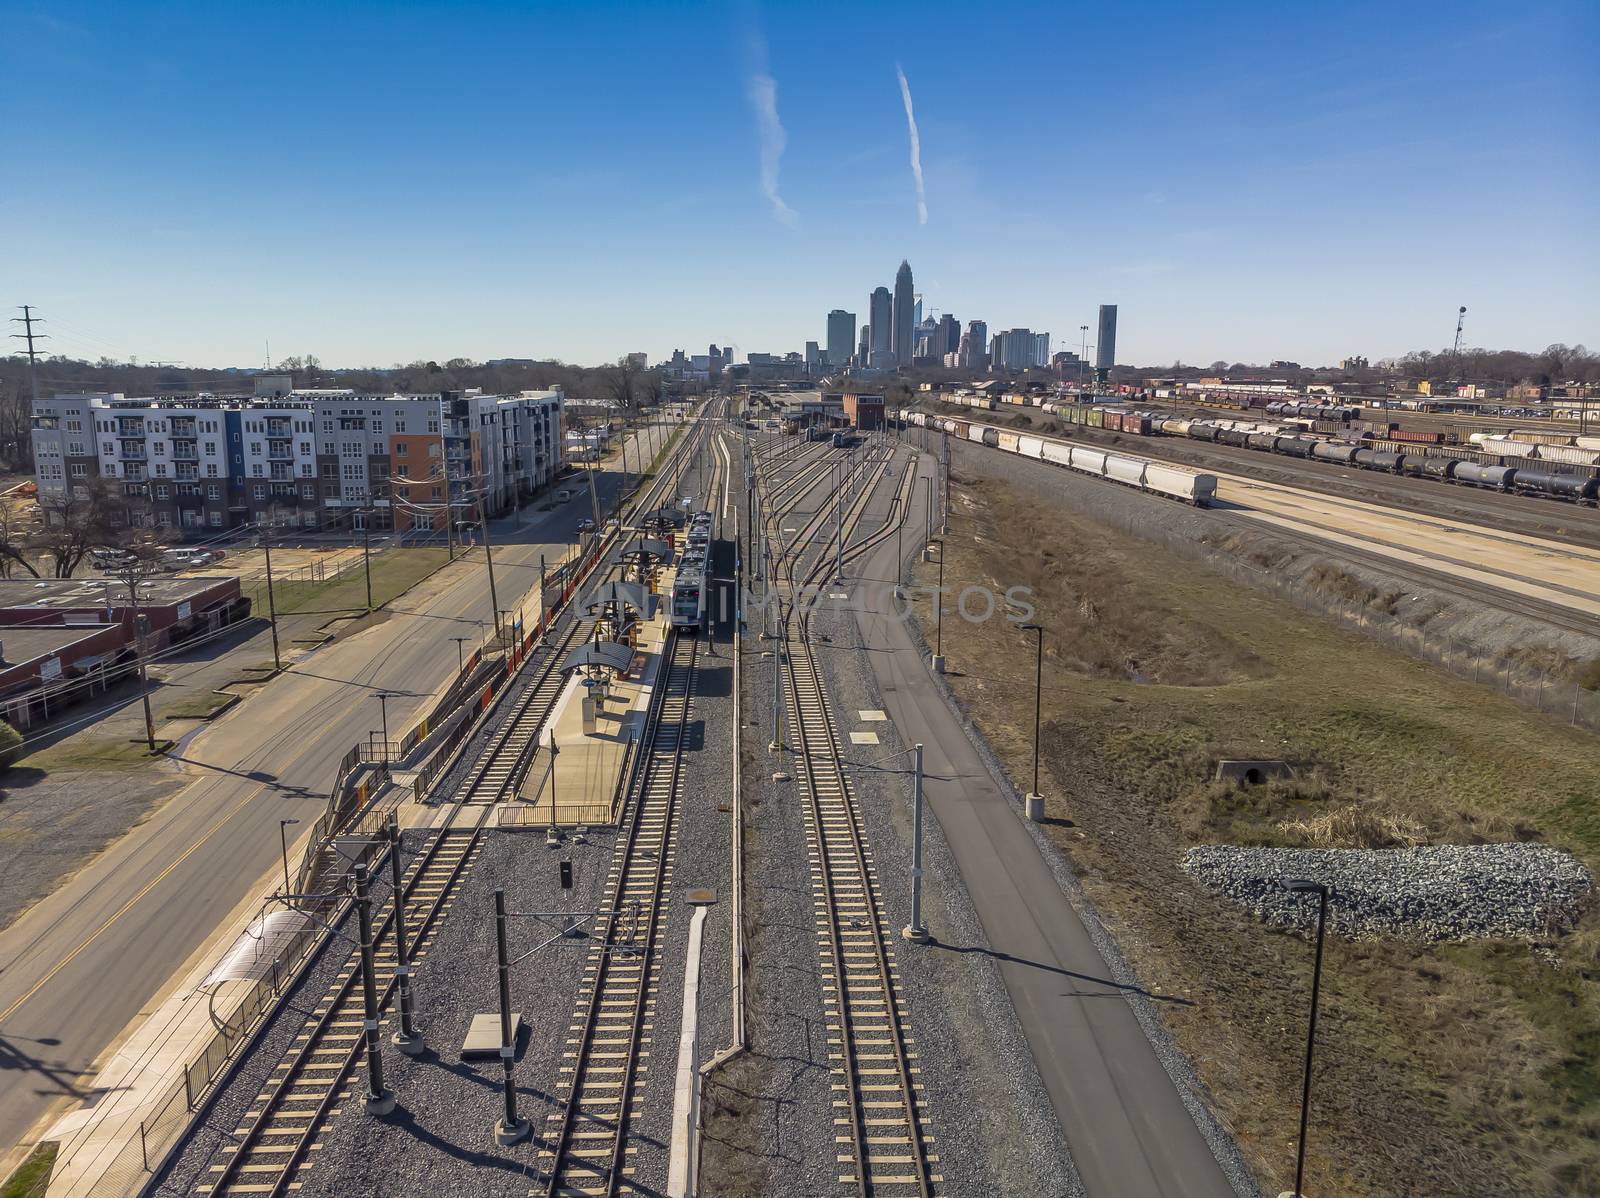 View of a train yard with the city of Charlotte, NC in the background